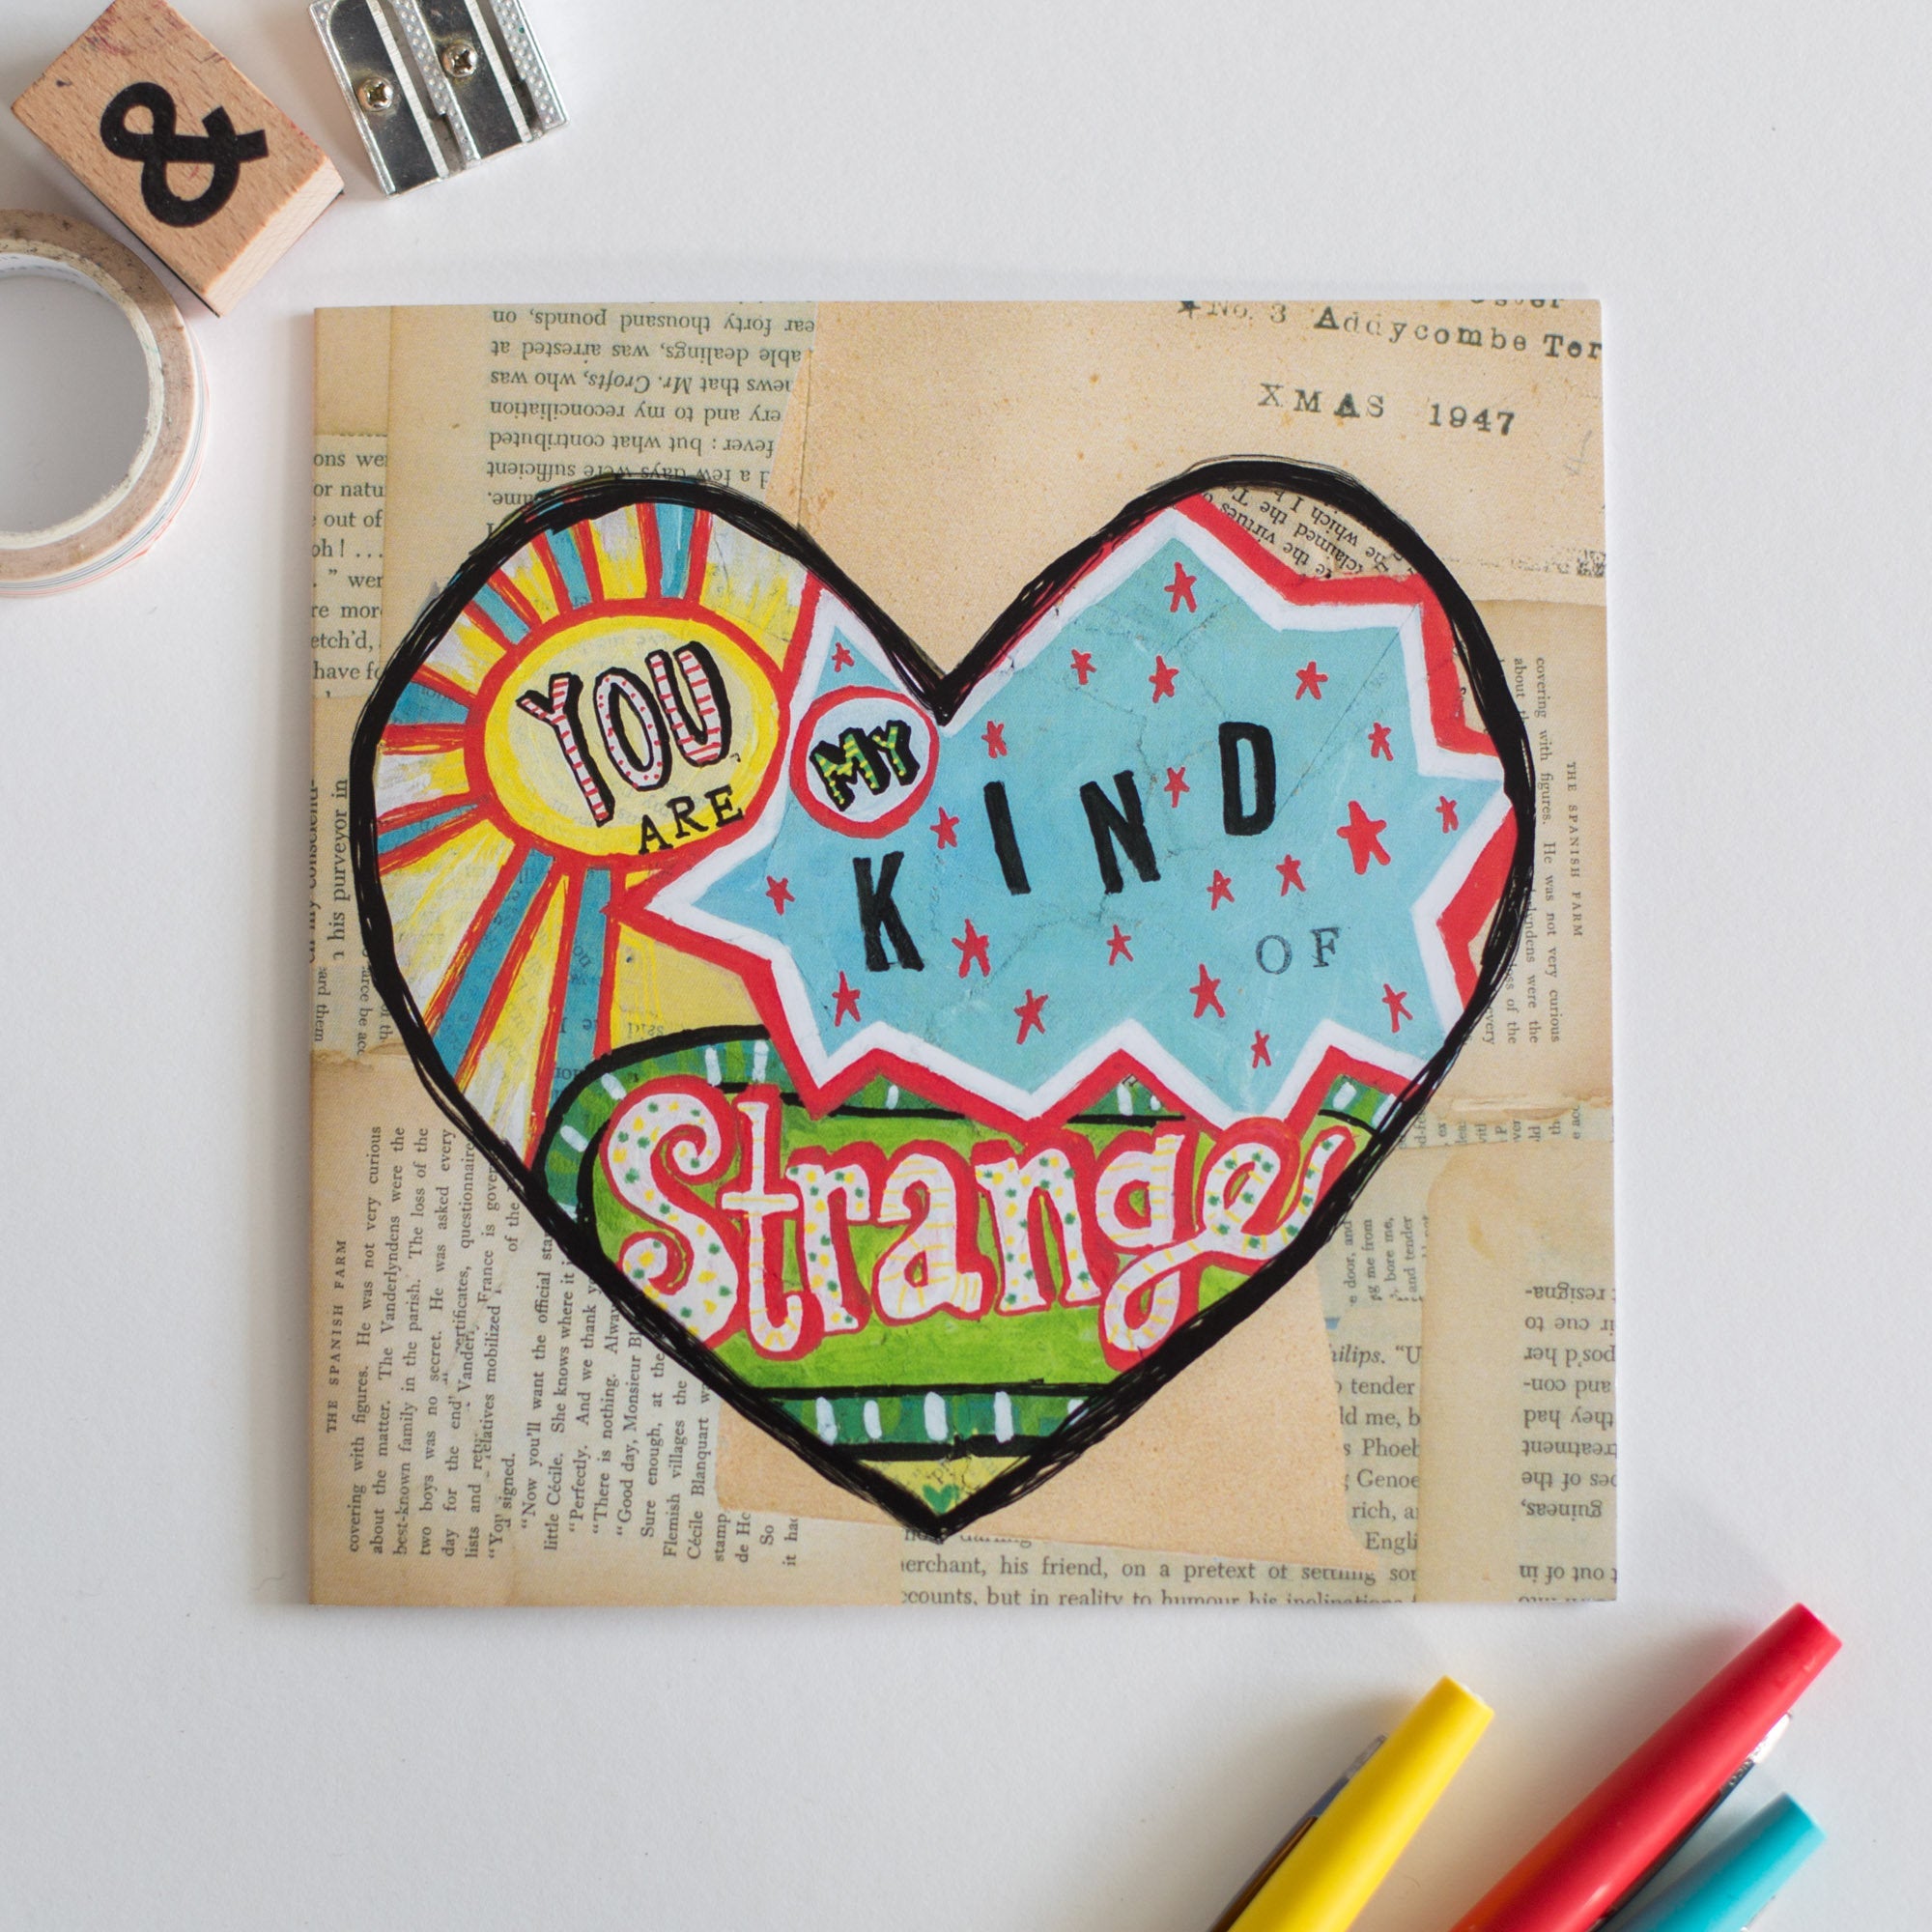 'You are my kind of Strange' Greetings Card